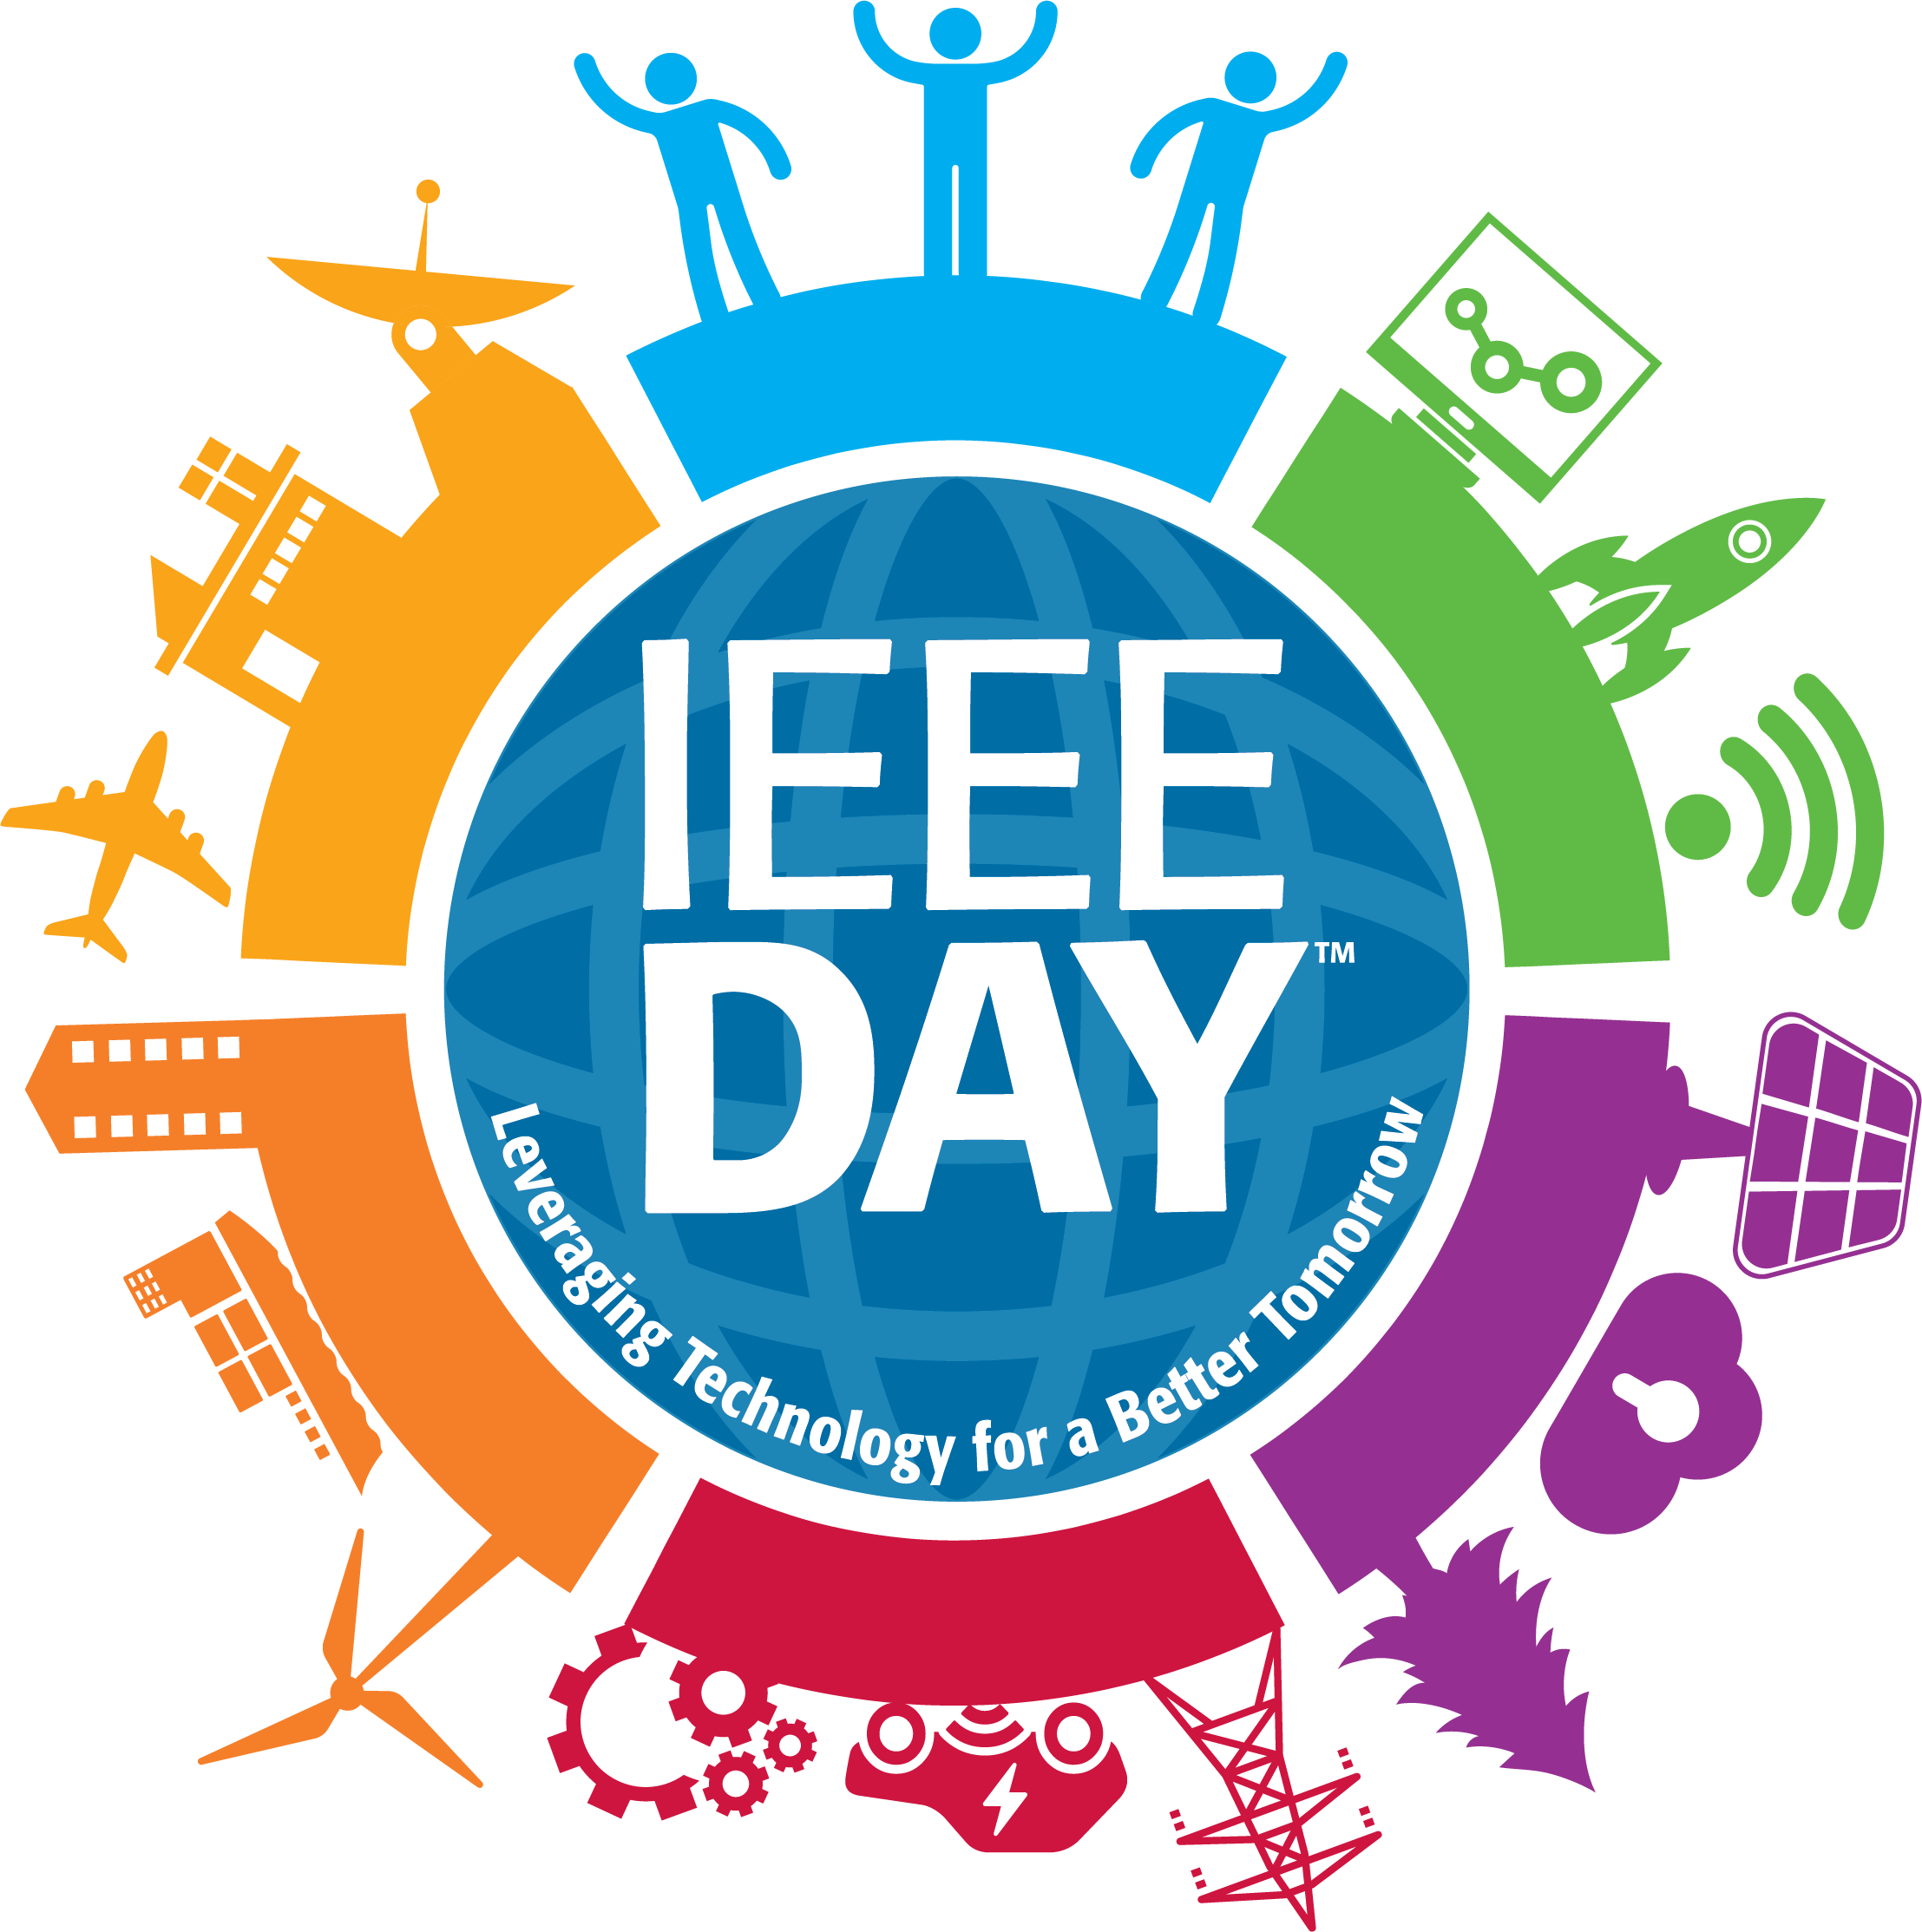 ieee_day